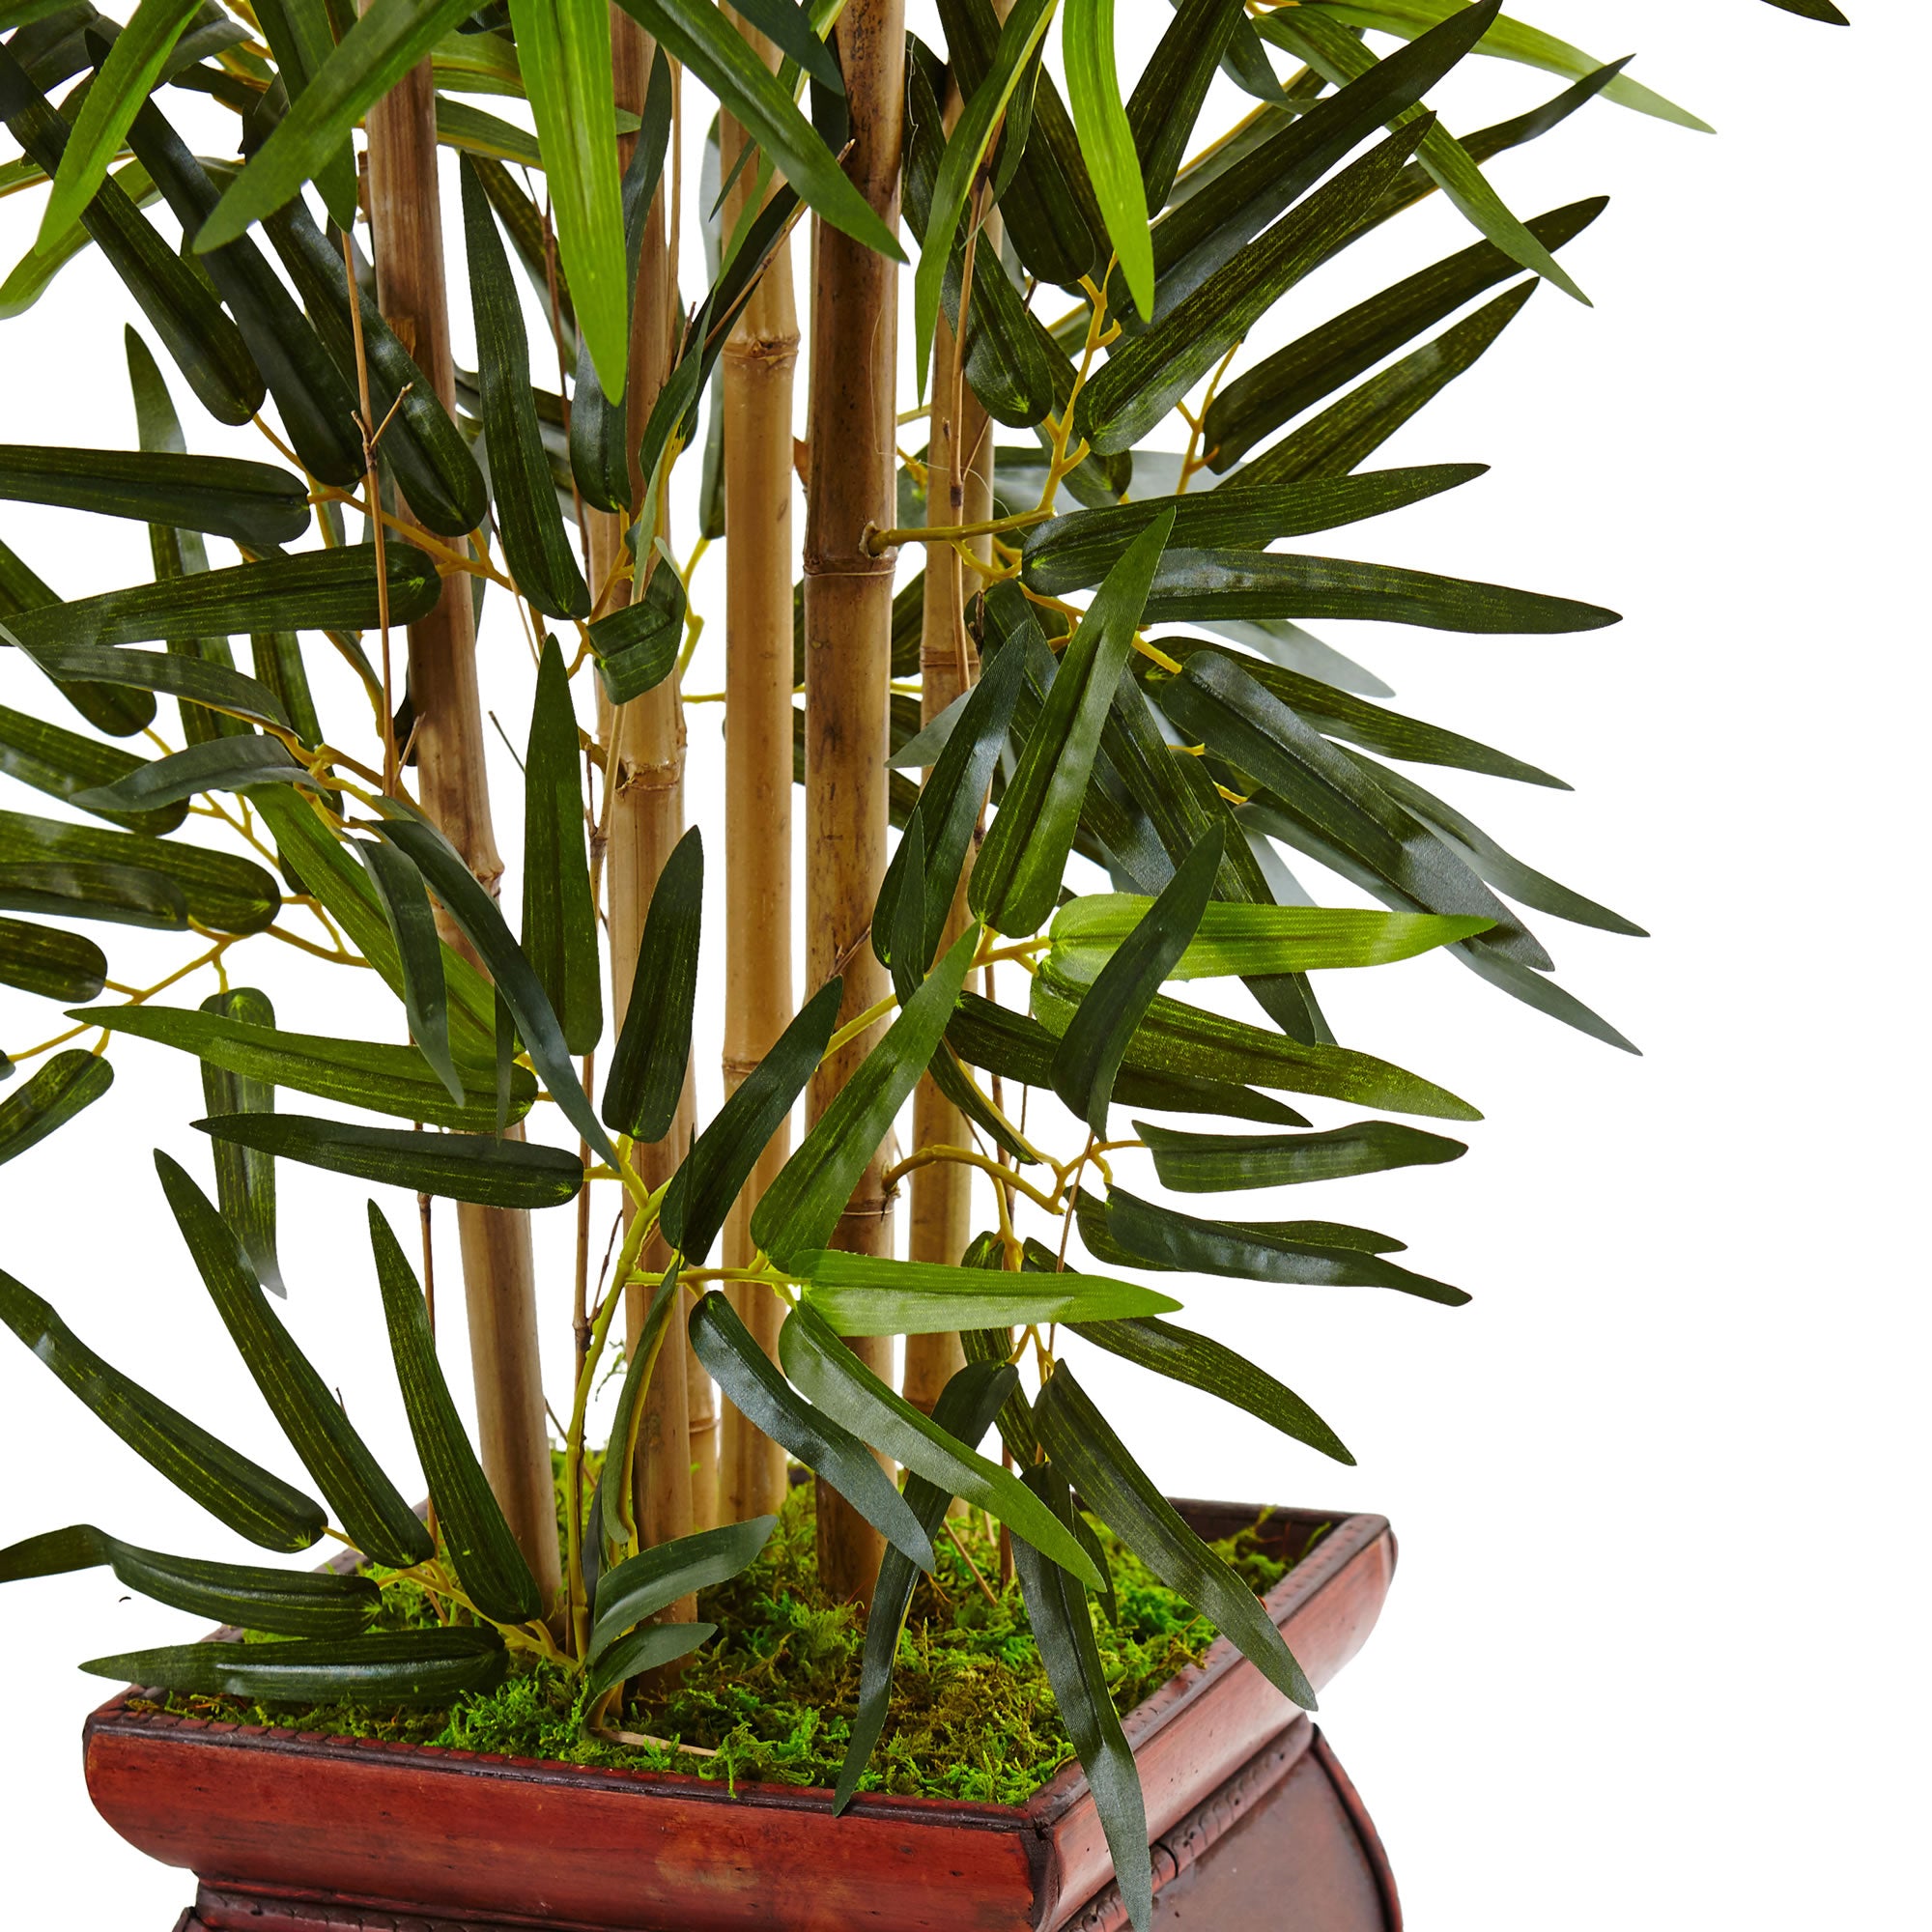 3.5" Bamboo Tree in Wooden Decorative Planter